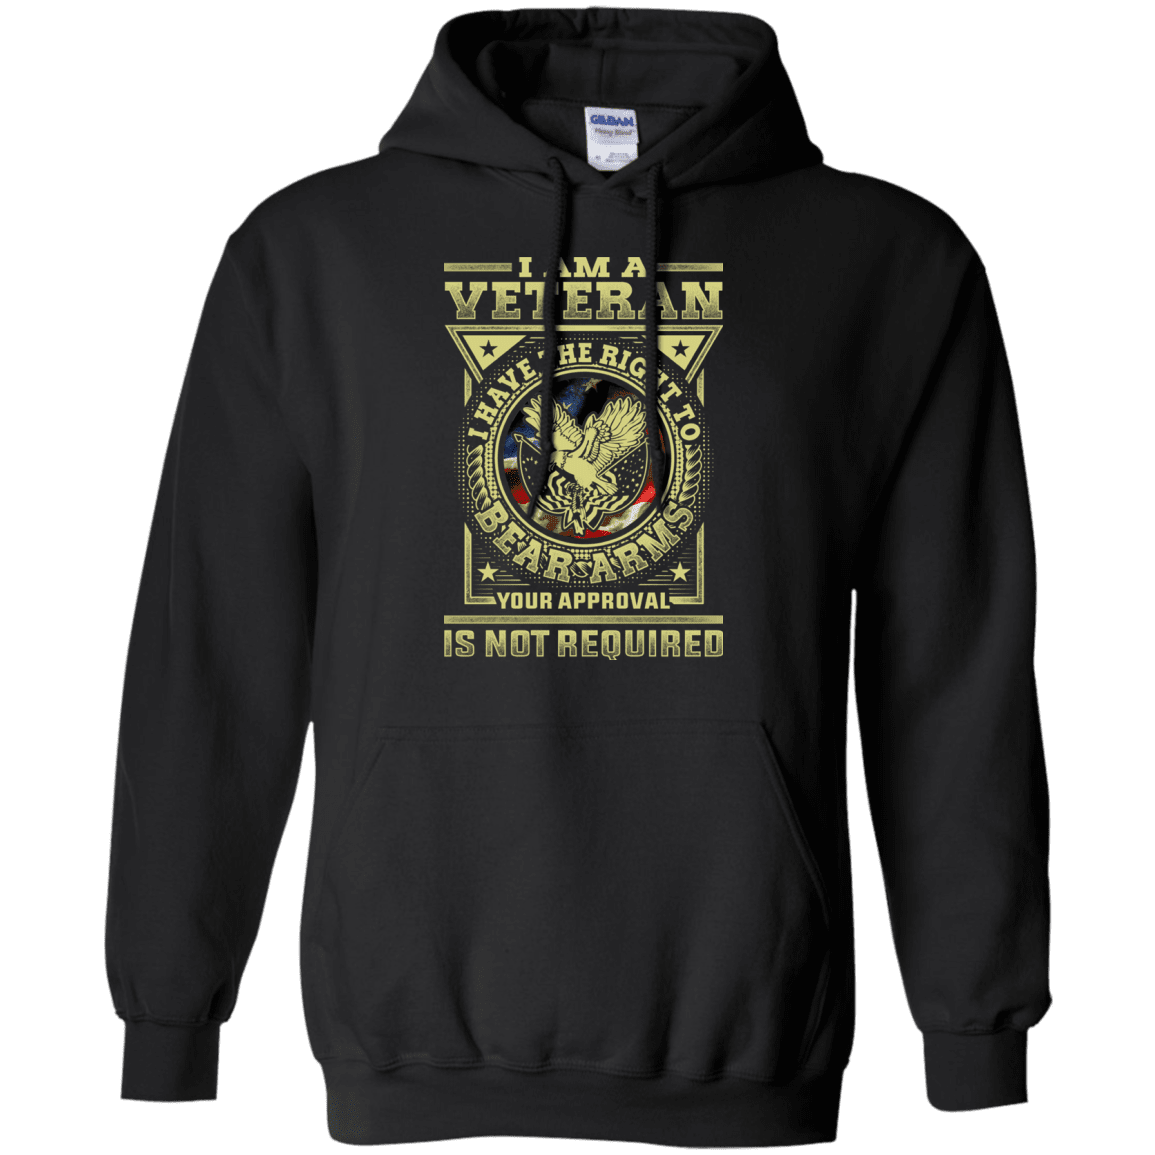 Military T-Shirt "Veteran Have the Right To Bear Arms Men" Front-TShirt-General-Veterans Nation